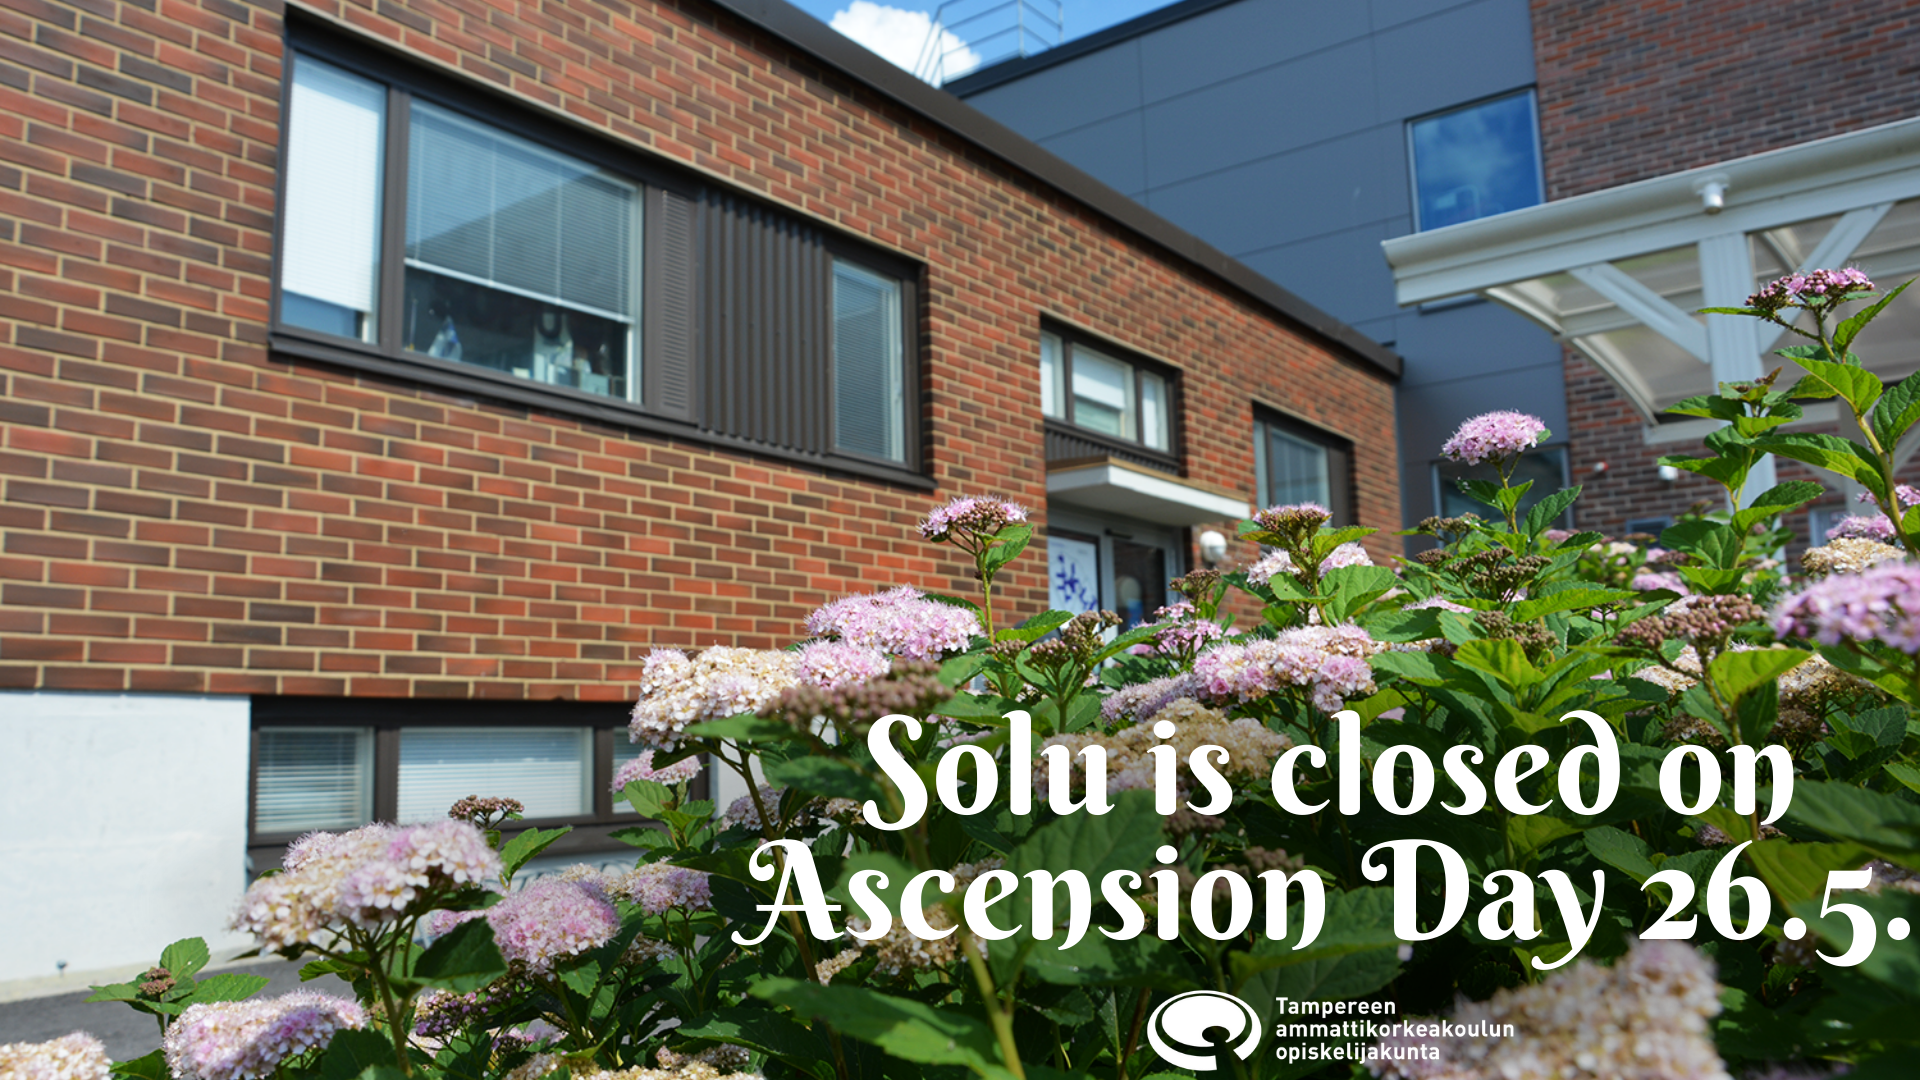 Solu is closed on Ascension Day 26.5.